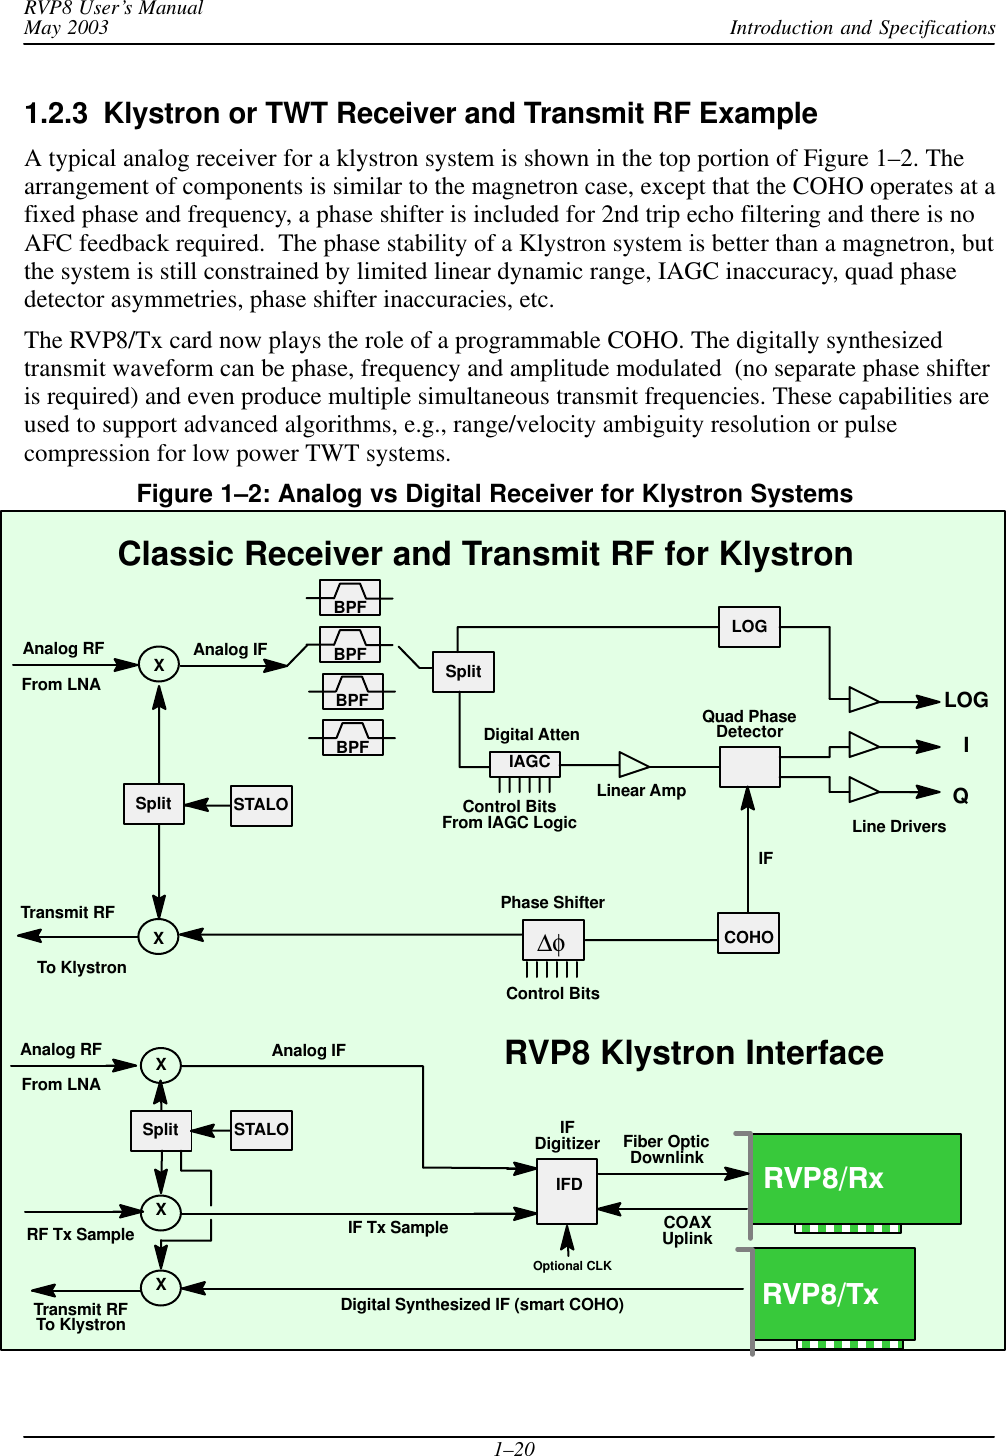 Introduction and SpecificationsRVP8 User’s ManualMay 20031–201.2.3  Klystron or TWT Receiver and Transmit RF ExampleA typical analog receiver for a klystron system is shown in the top portion of Figure 1–2. Thearrangement of components is similar to the magnetron case, except that the COHO operates at afixed phase and frequency, a phase shifter is included for 2nd trip echo filtering and there is noAFC feedback required.  The phase stability of a Klystron system is better than a magnetron, butthe system is still constrained by limited linear dynamic range, IAGC inaccuracy, quad phasedetector asymmetries, phase shifter inaccuracies, etc.The RVP8/Tx card now plays the role of a programmable COHO. The digitally synthesizedtransmit waveform can be phase, frequency and amplitude modulated  (no separate phase shifteris required) and even produce multiple simultaneous transmit frequencies. These capabilities areused to support advanced algorithms, e.g., range/velocity ambiguity resolution or pulsecompression for low power TWT systems.Figure 1–2: Analog vs Digital Receiver for Klystron SystemsClassic Receiver and Transmit RF for KlystronCOHORVP8 Klystron InterfaceTransmit RFXTo KlystronAnalog IF IFDigital AttenControl BitsIAGCSplitLOGLinear AmpQuad PhaseDetectorFrom IAGC LogicSplitIQLOGLine DriversBPFBPFBPFXAnalog RFFrom LNABPFAnalog IFIFDigitizer Fiber OpticIF Tx SampleRF Tx SampleXDigital Synthesized IF (smart COHO)COAXUplinkIFDDownlinkXAnalog RFFrom LNASplitXTransmit RFTo KlystronOptional CLKRVP8/TxRVP8/Rx∆φPhase ShifterControl BitsSTALOSTALO